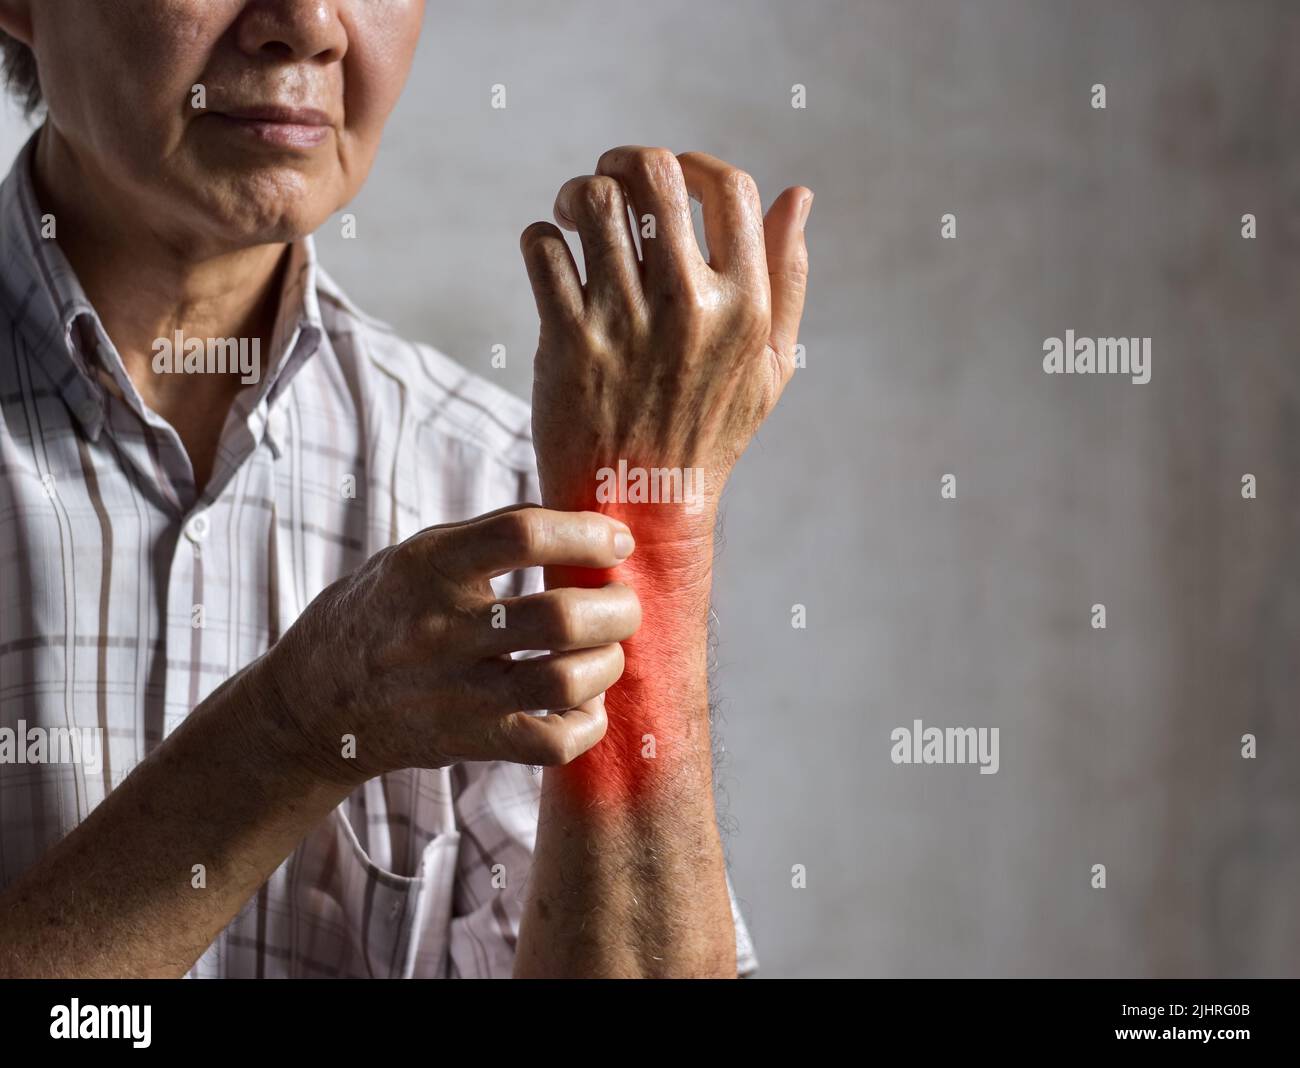 Asian elder man scratching his forearm. Concept of itchy skin diseases such as scabies, fungal infection, eczema, psoriasis, allergy, etc. Stock Photo